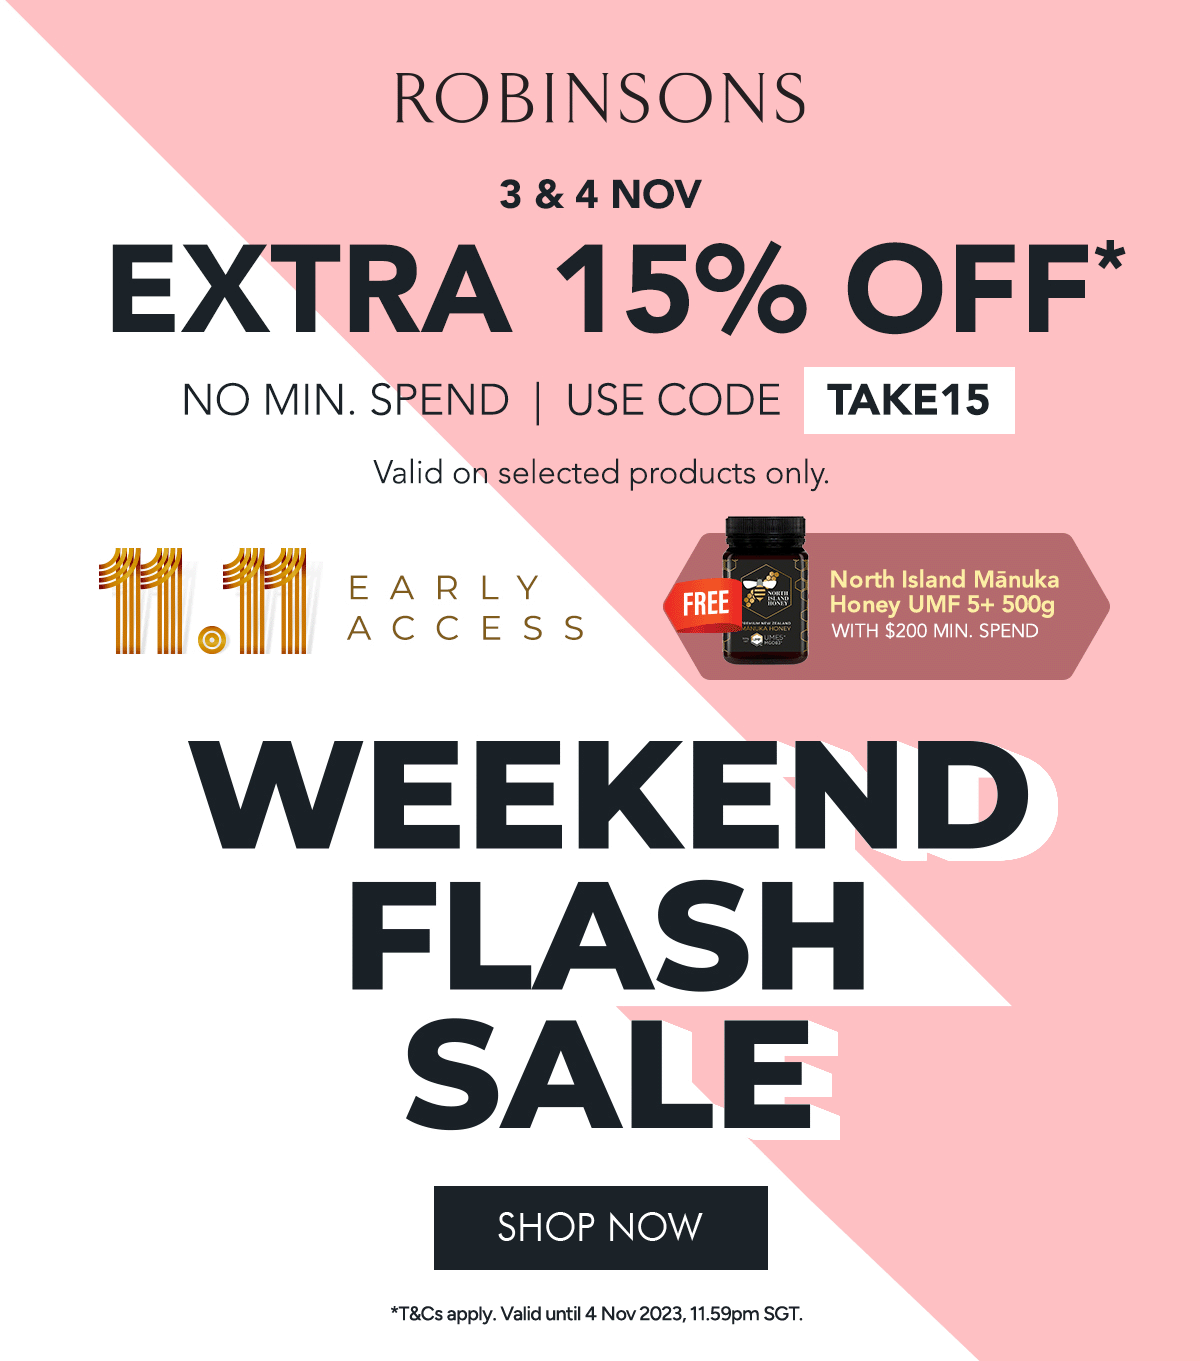 Weekend Flash Sale: Get EXTRA 15% OFF*